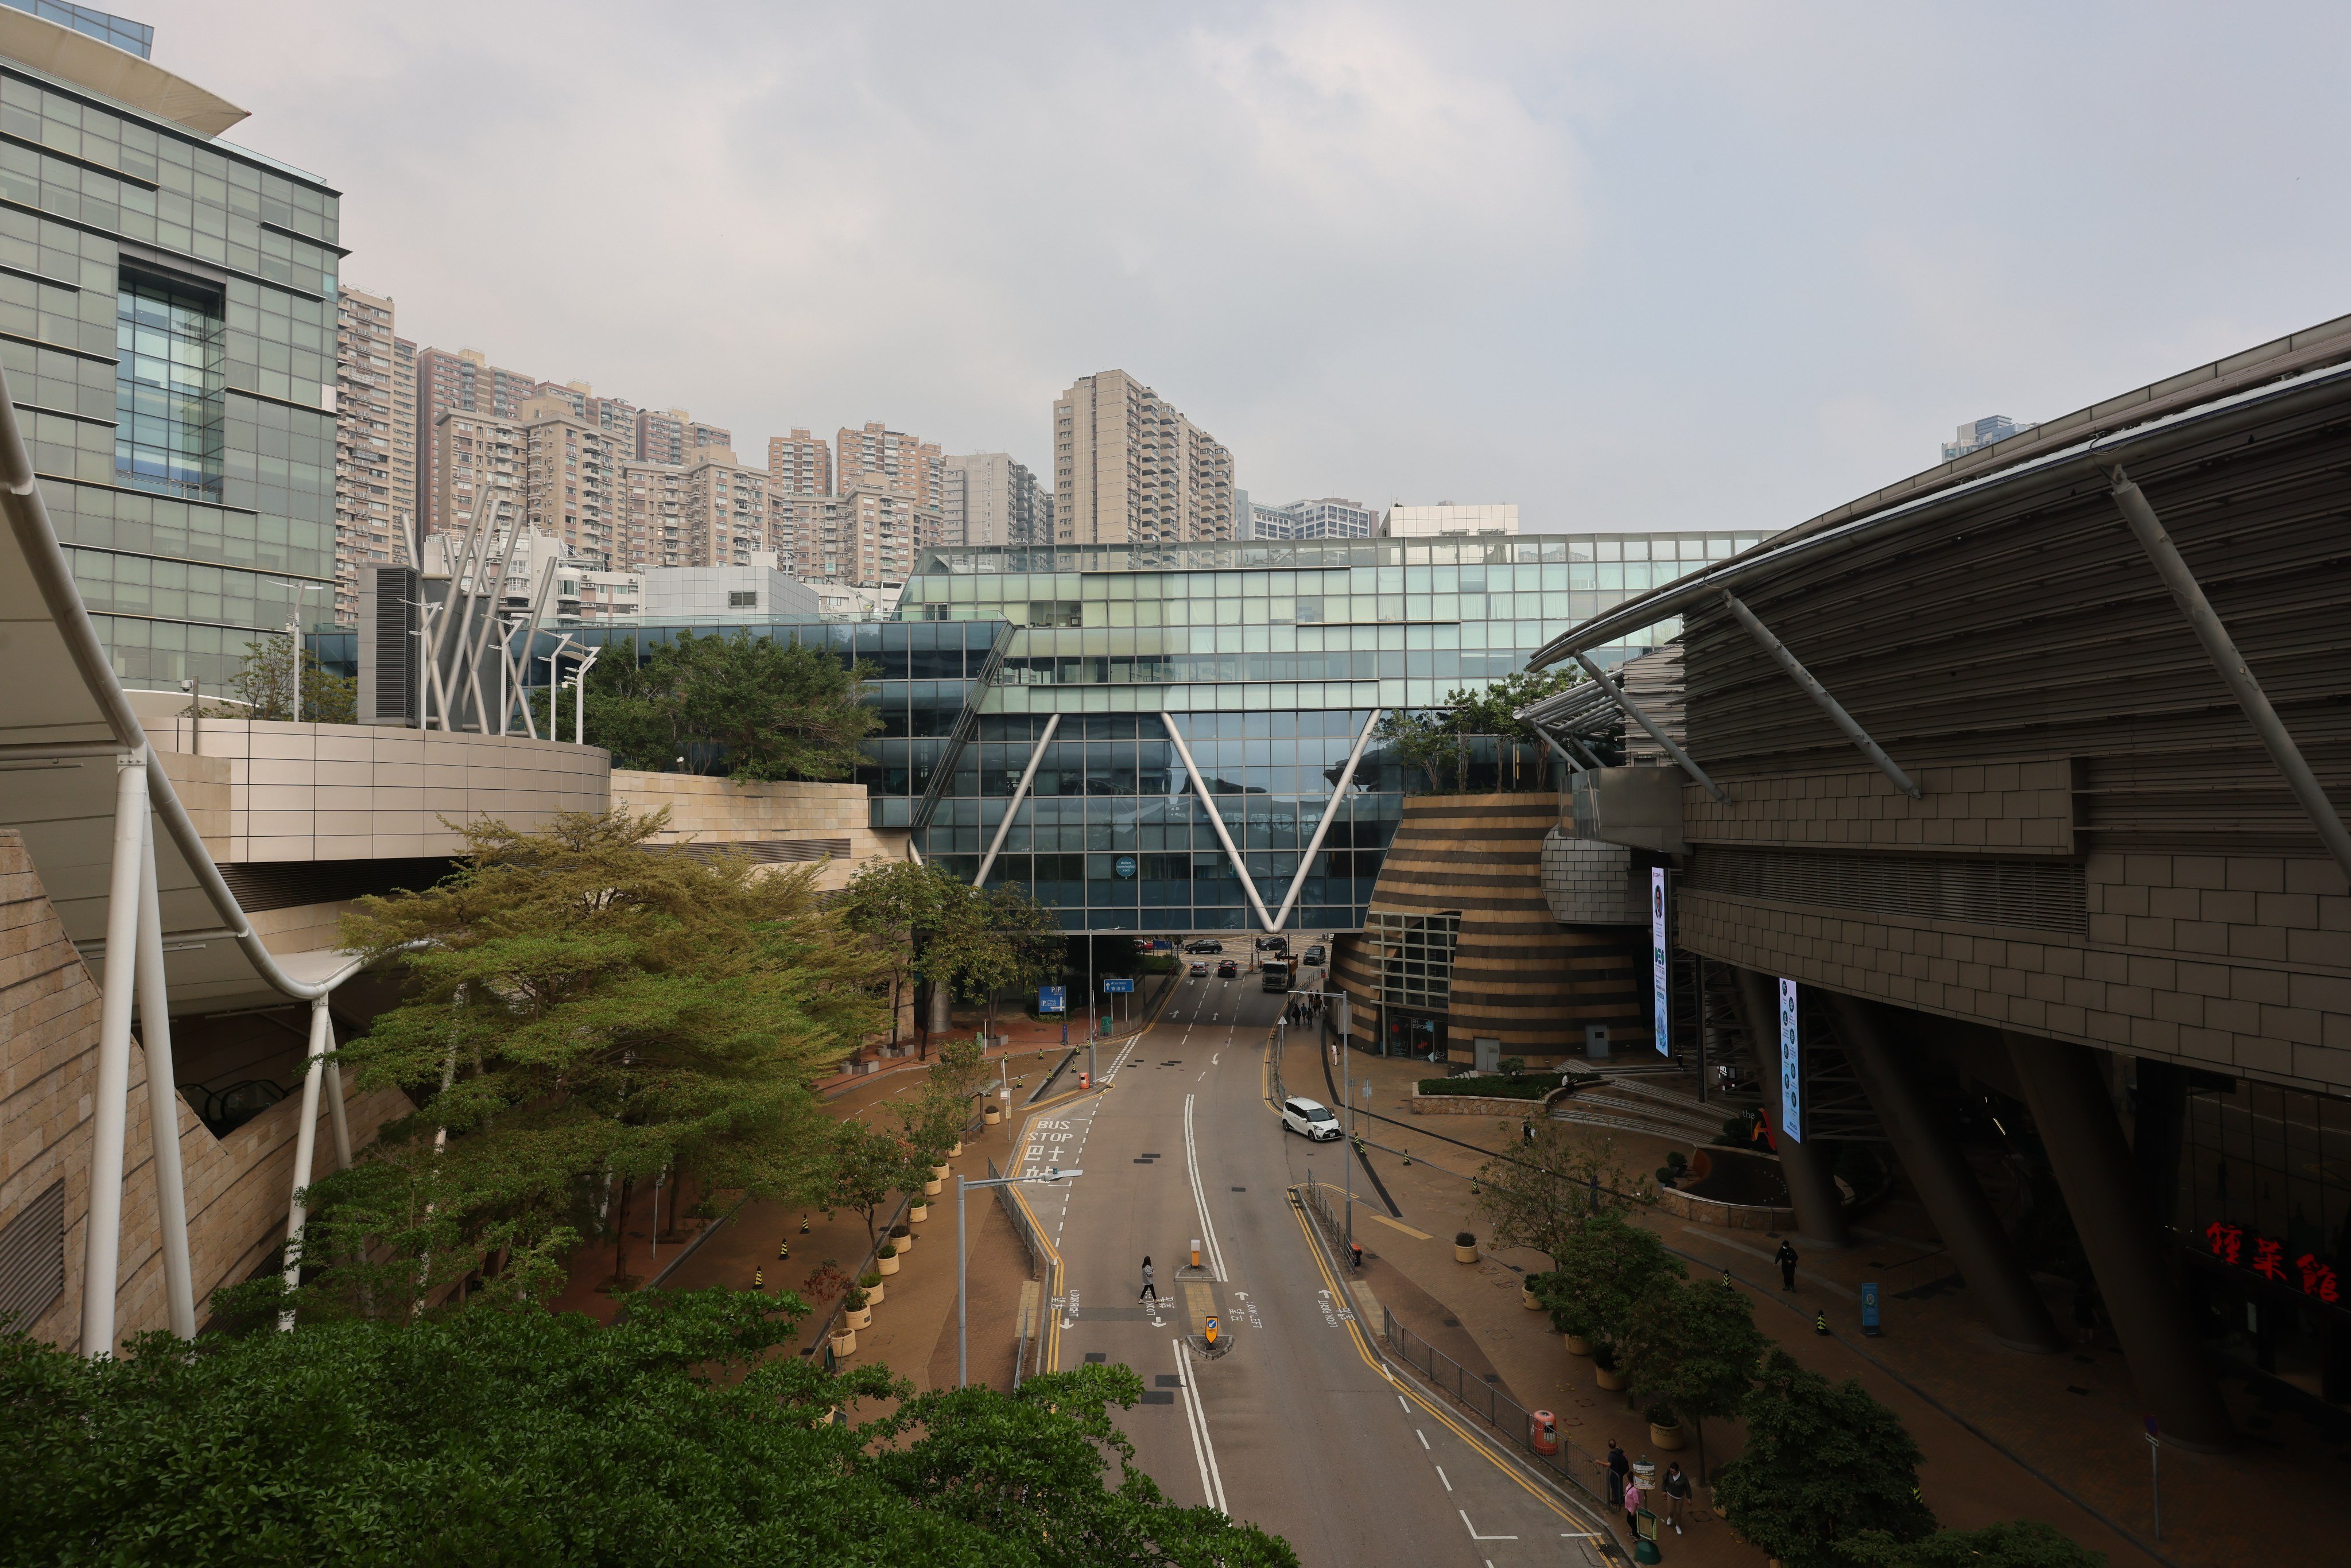 Cyberport in Hong Kong’s Southern district. The expansion of Cyberport presents an ideal opportunity for HKU. By moving its Global Innovation Centre to Cyberport 5, it won’t need to ruin valuable green belt space in Pok Fu Lam. Photo: Jelly Tse